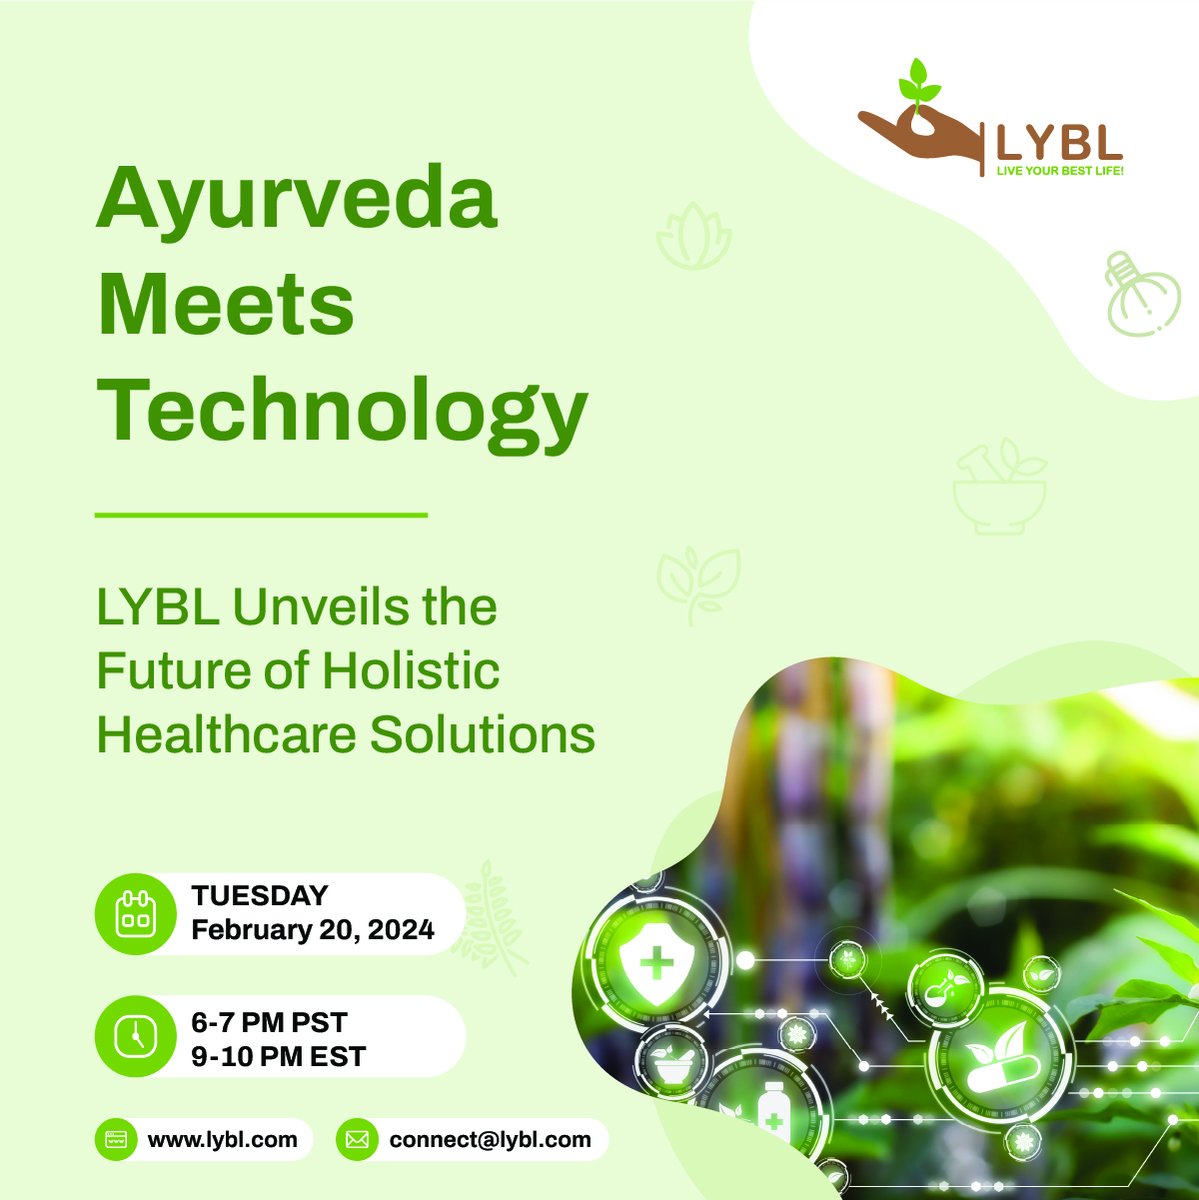 Say hello to the future of Ayurvedic practitioner tools! LYBL is proud to introduce our cutting-edge technology that seamlessly integrates Ayurveda with technology. #Ayurveda #Health #OnlineConsultations #WellnessApp #Technology #USpractitioners #JoinUs